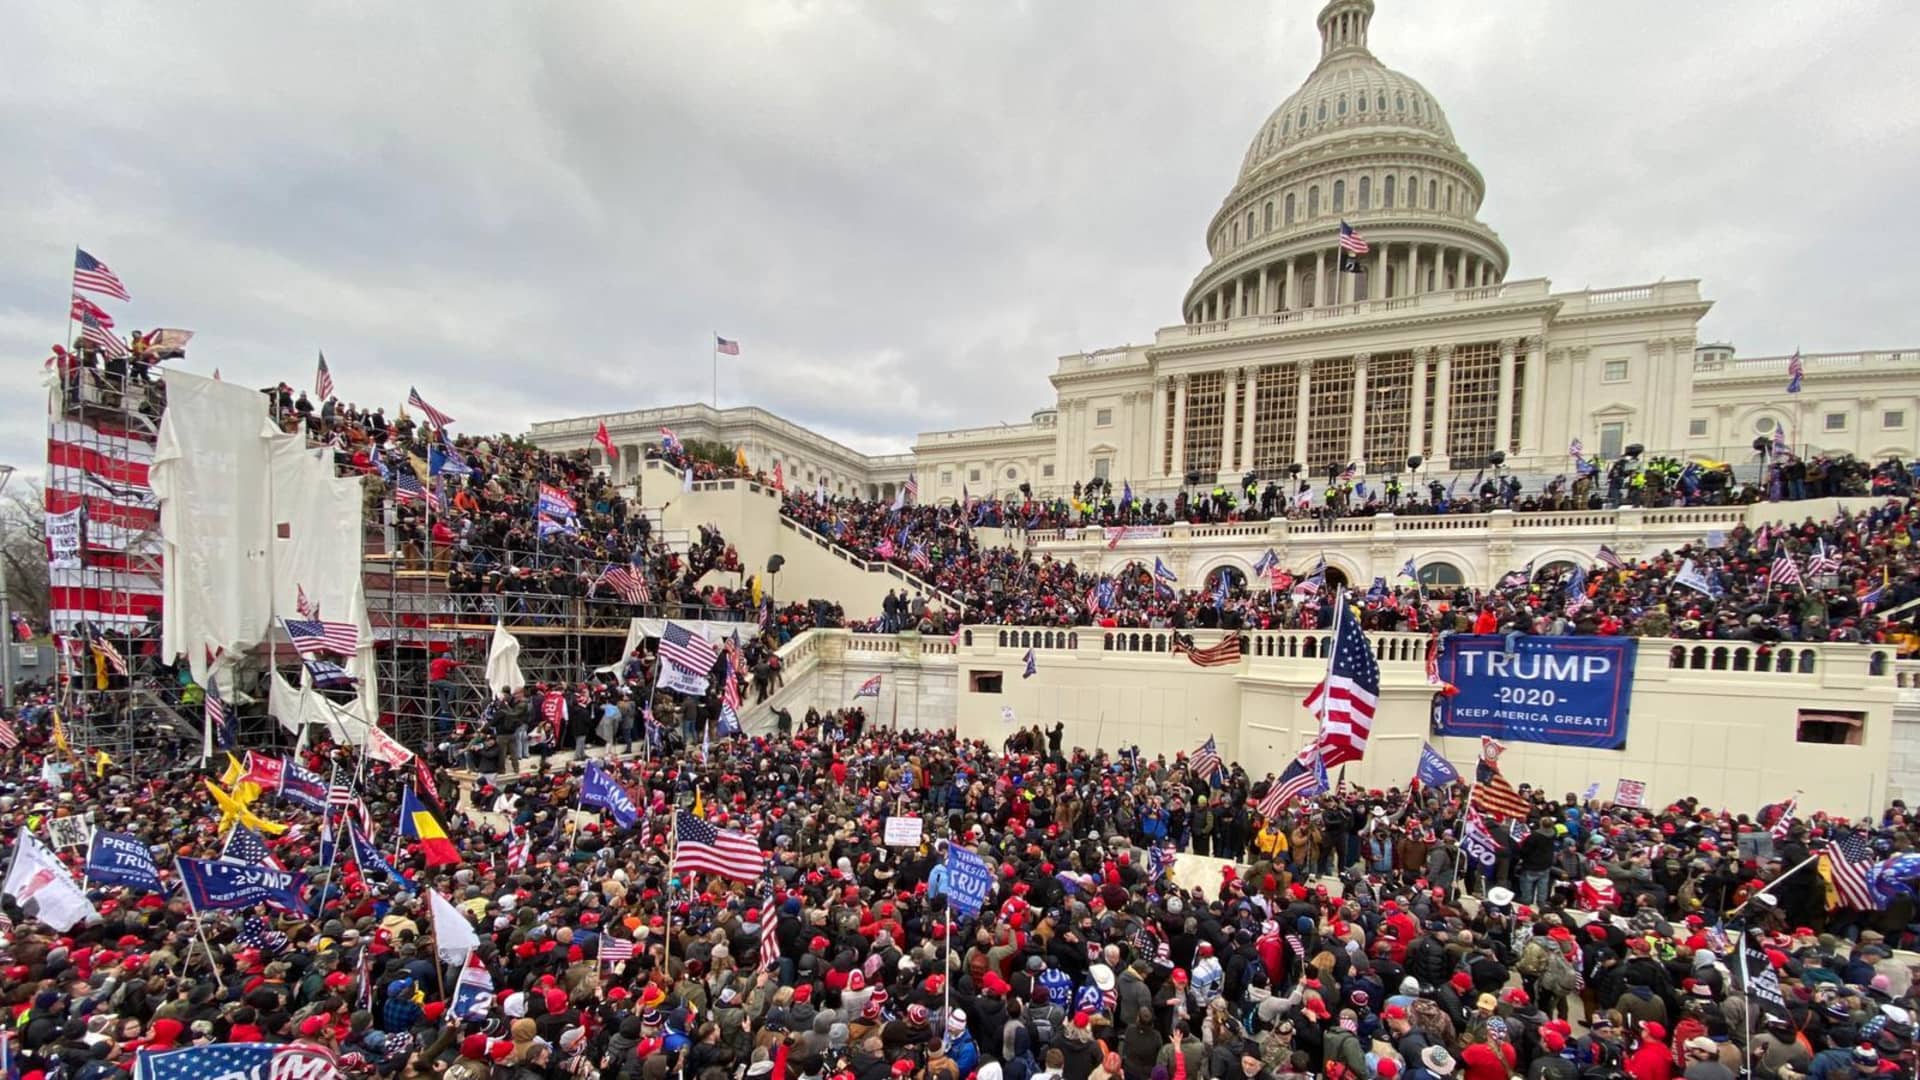 U.S. President Donald Trump's supporters gather outside the Capitol building in Washington D.C. on Jan. 6, 2021.